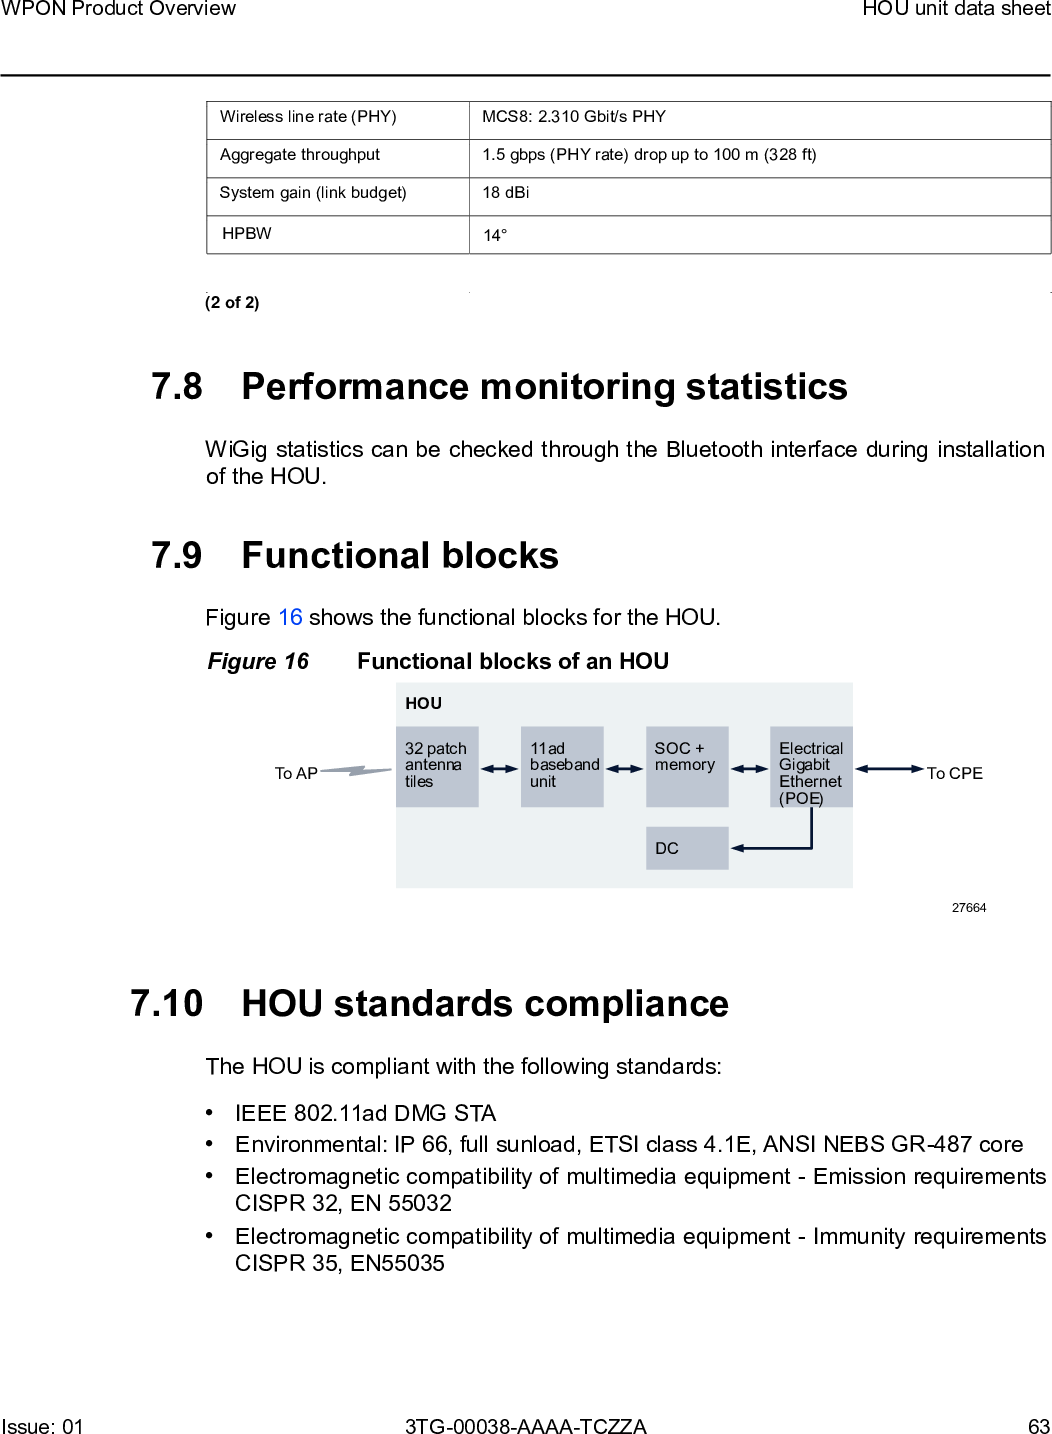 Page 63 of Nokia Bell 7577WPONAPDC WPON User Manual WPON Product Overview